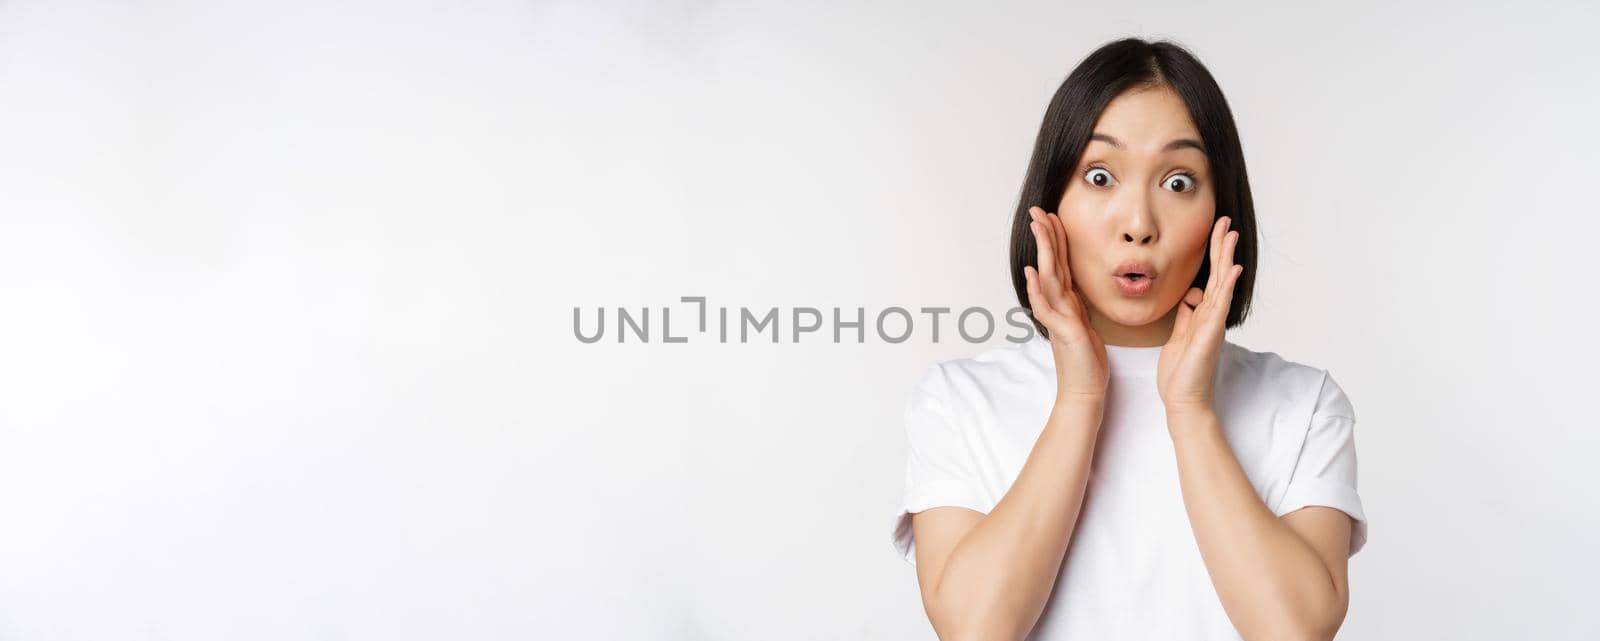 Close up portrait of asian girl looking surprised, wow face, reacting amazed at smth, standing in white tshirt over studio background, isolated.